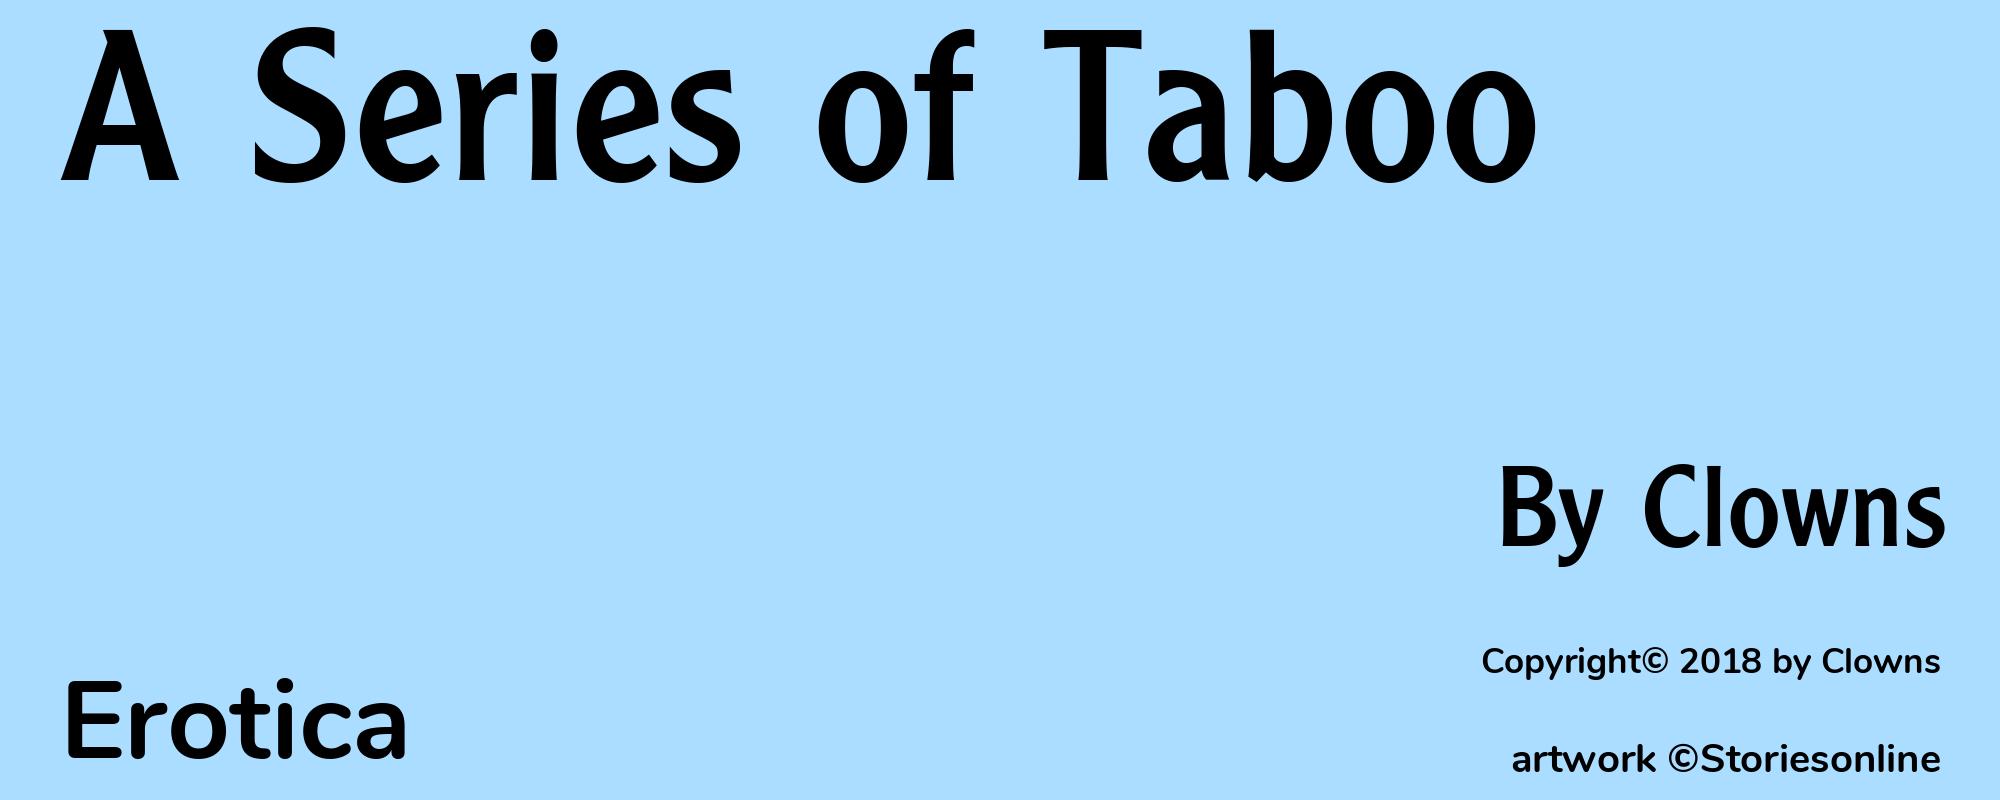 A Series of Taboo - Cover